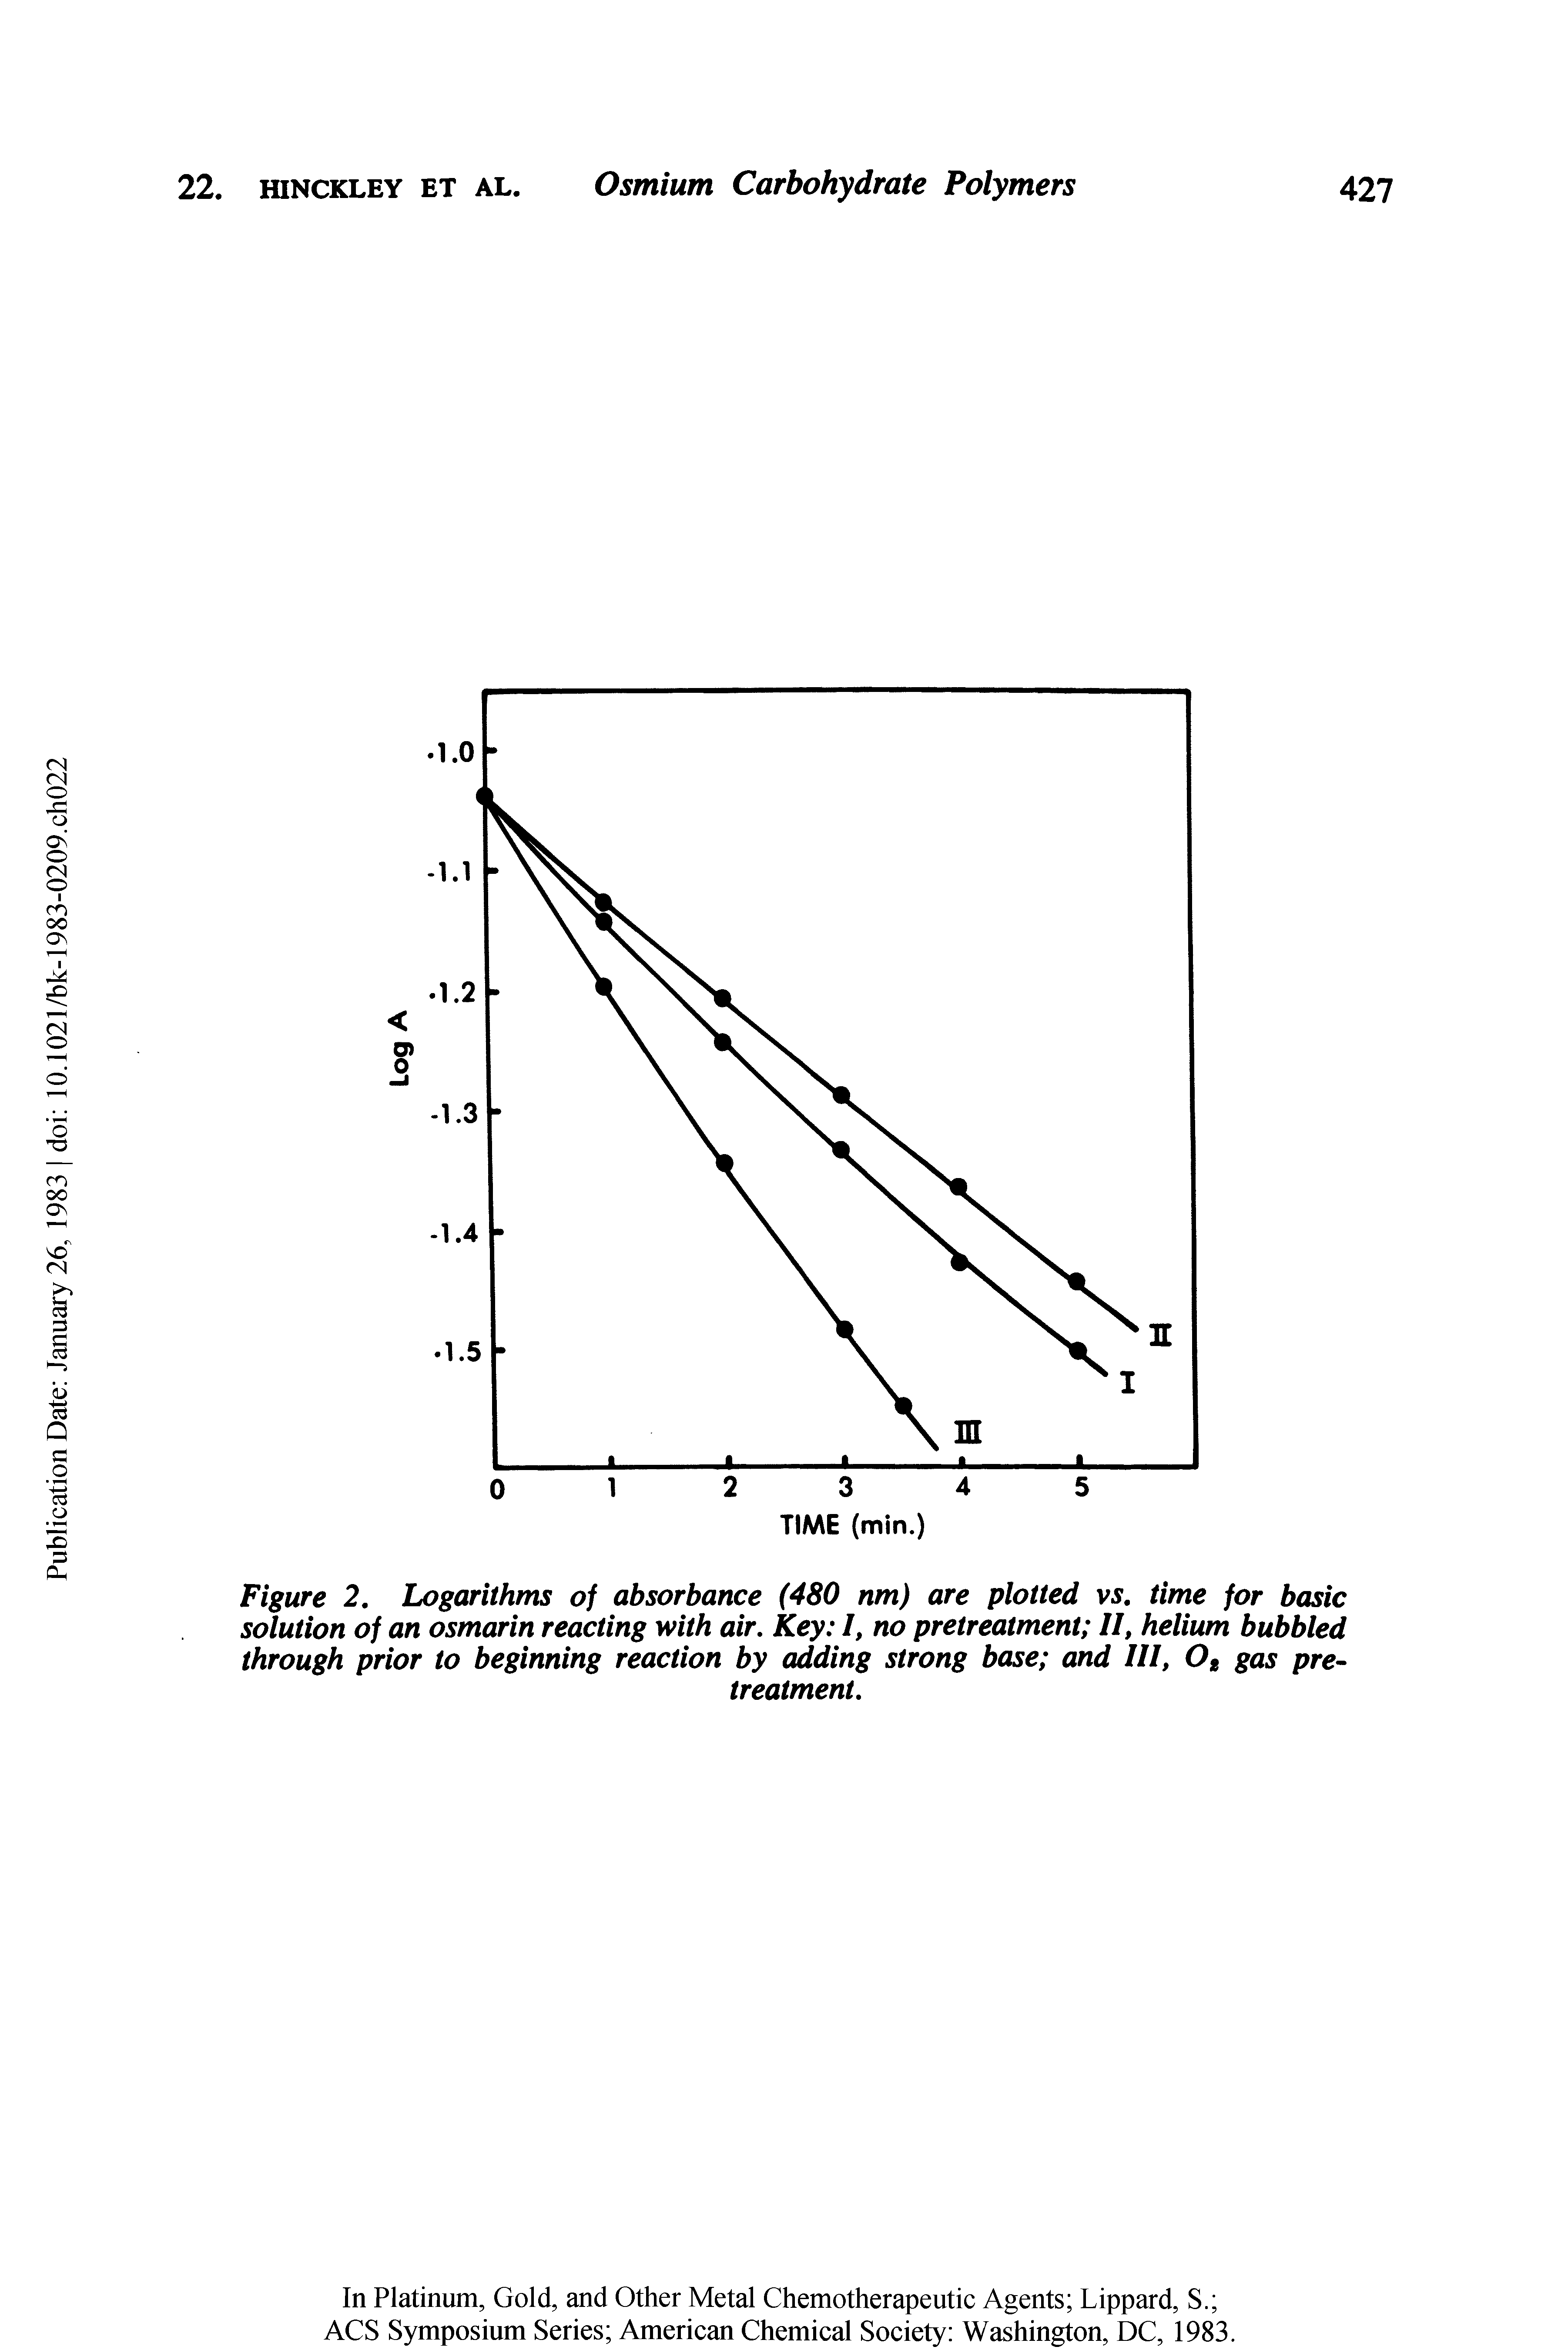 Figure 2, Logarithms of absorbance (480 nm) are plotted vs. time for basic solution of an osmarin reacting with air. Key /, no pretreatment II, helium bubbled through prior to beginning reaction by adding strong base and III, O, gas pre ...